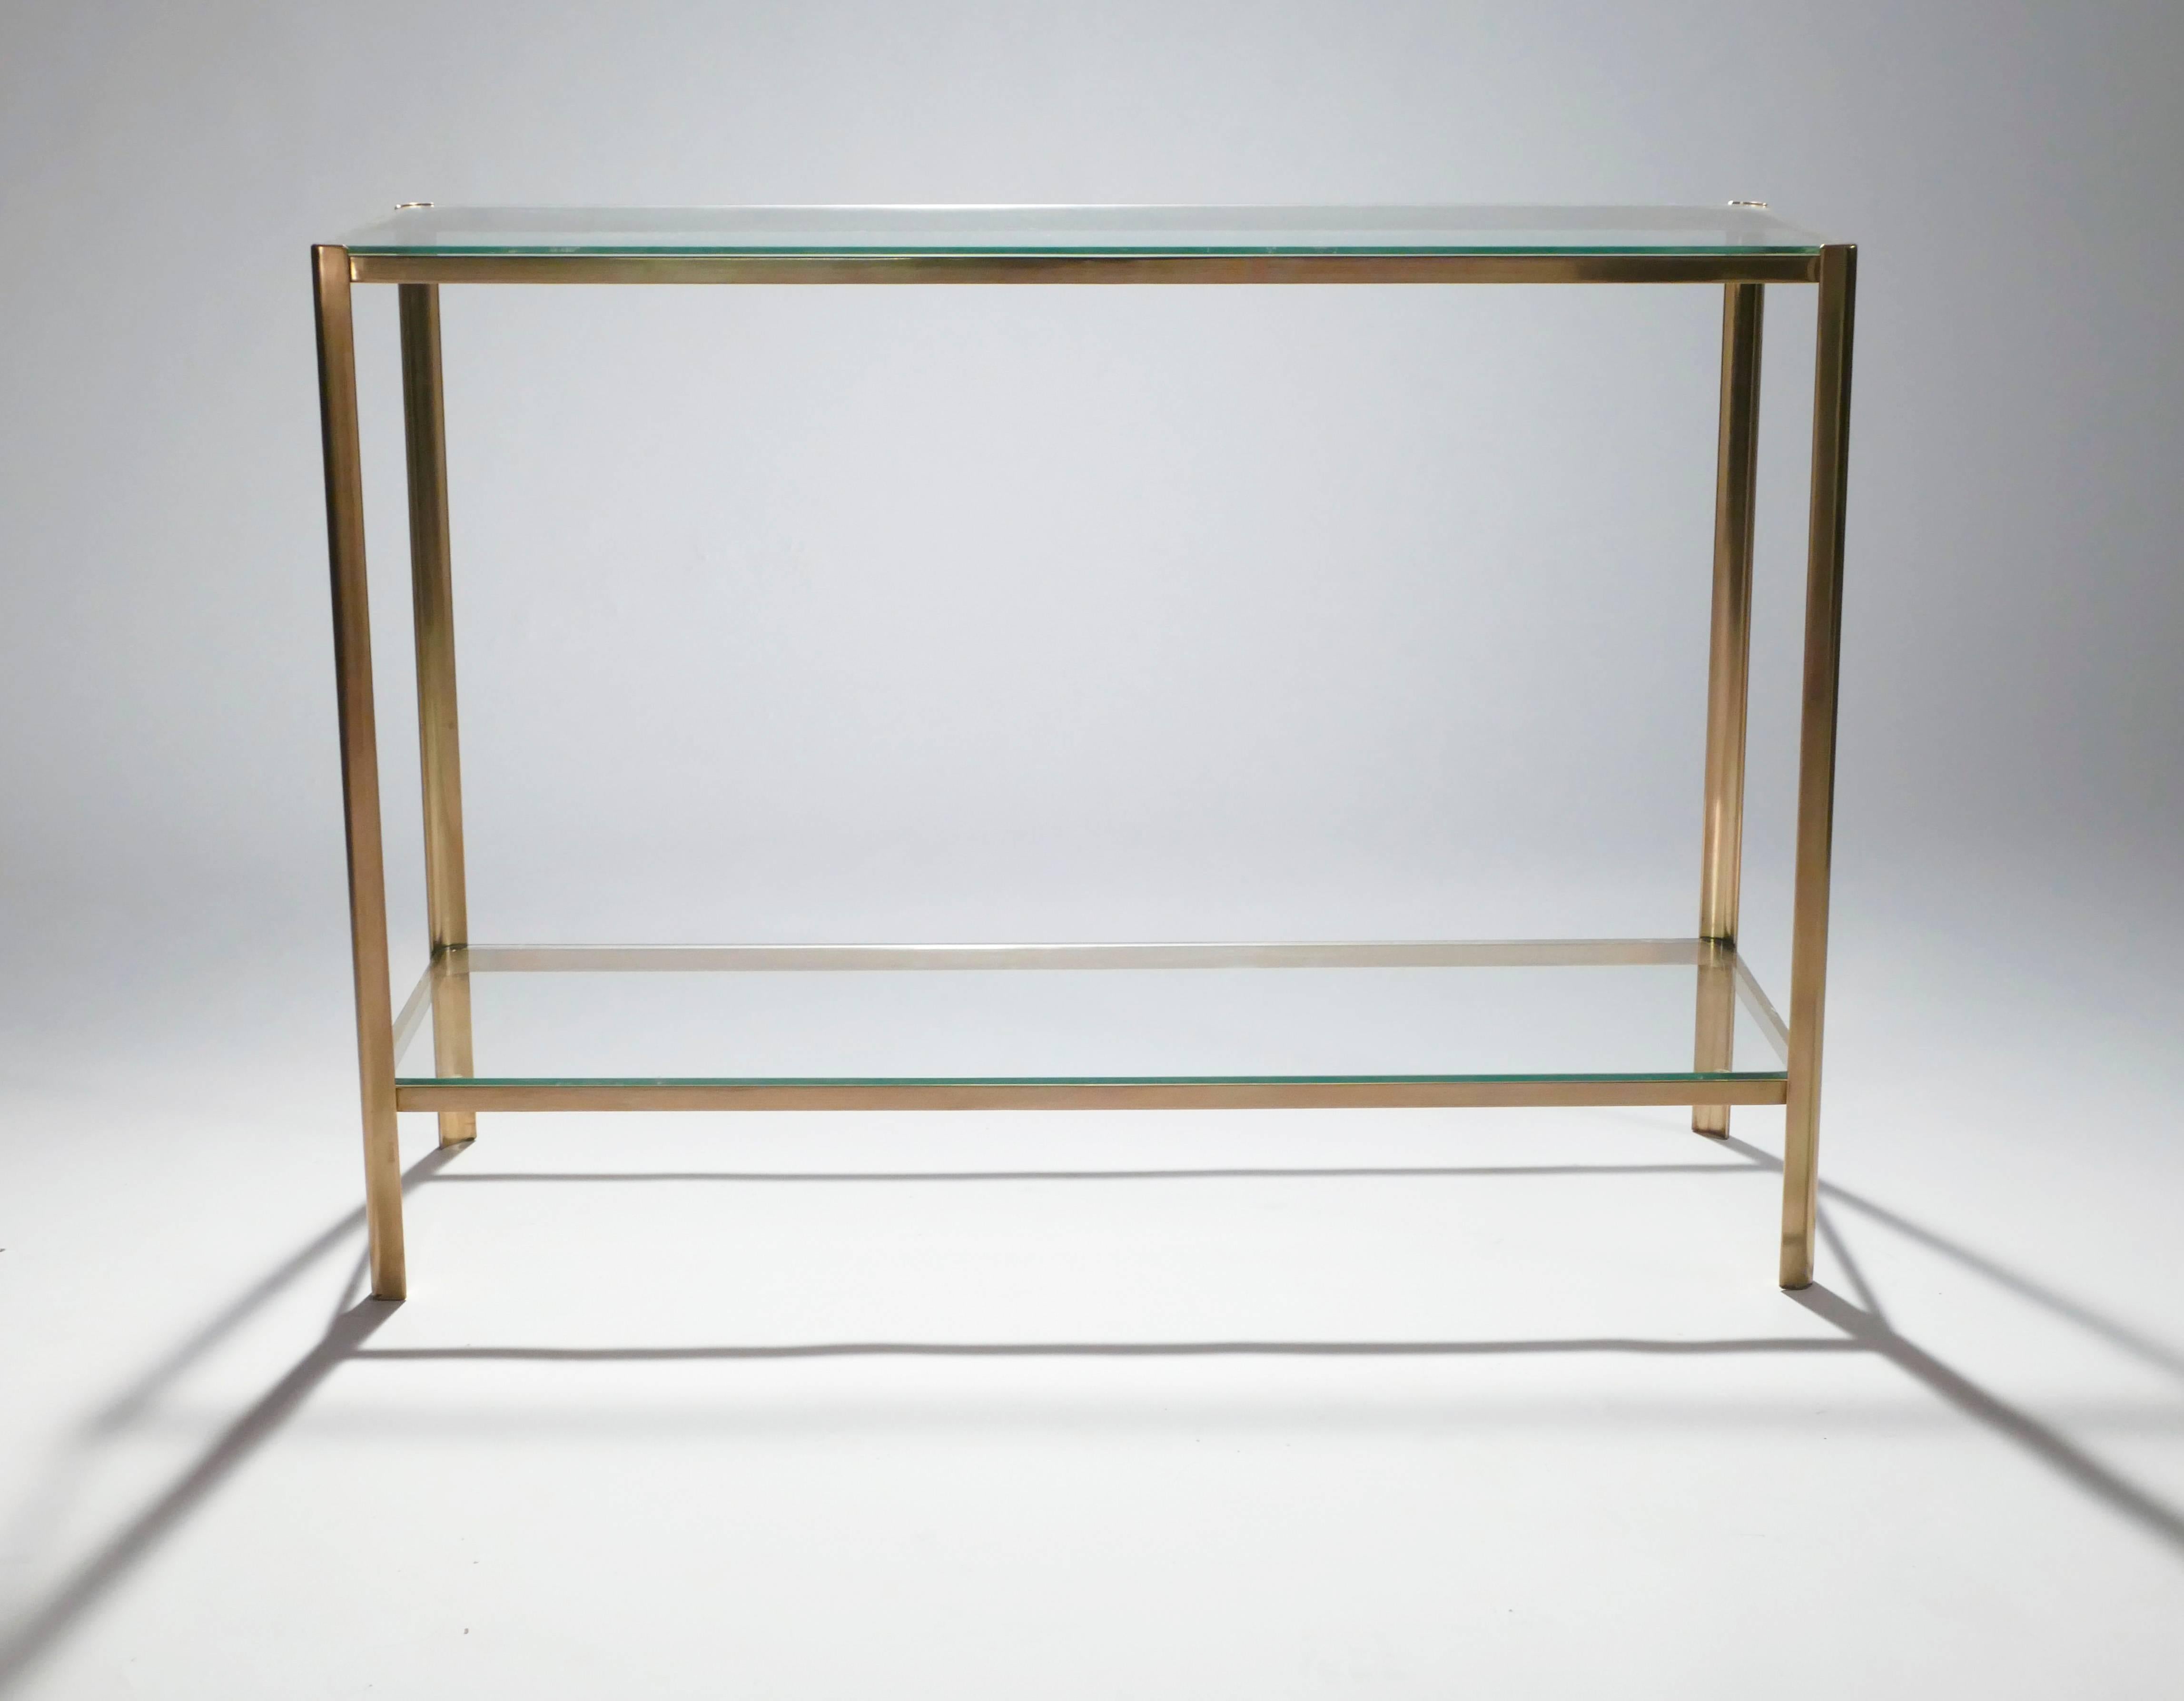 This mint-condition piece is signed by Jacques Quinet and stamped by Broncz. A rare find as a console table, it’s nonetheless quintessentially midcentury. Its solid brass feet and pristine glass 2/3 top present the simple, timeless look of the era.